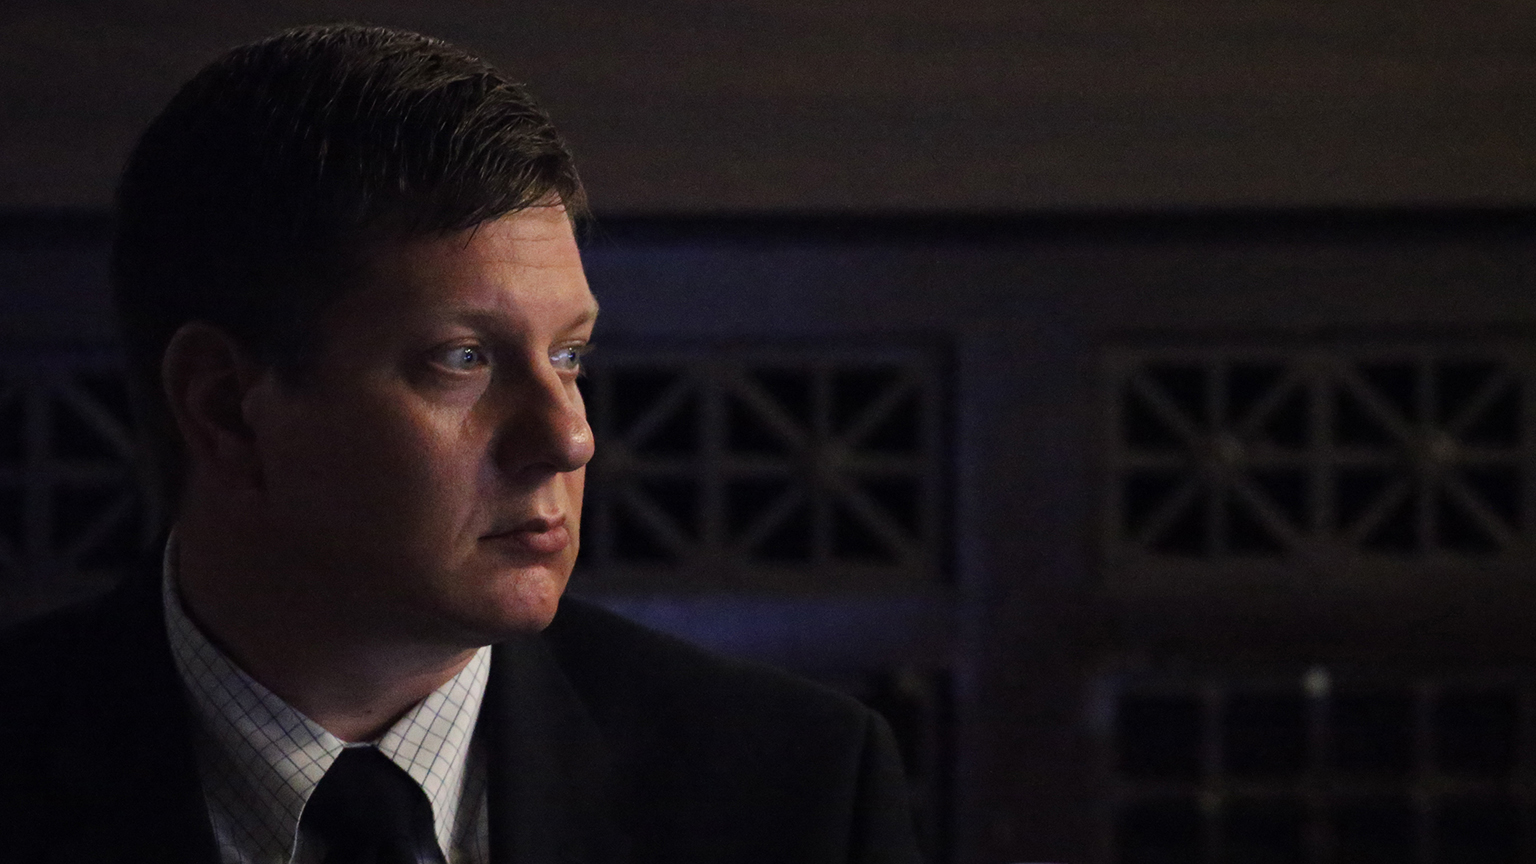 Chicago police Officer Jason Van Dyke listens to court proceedings on Monday, Sept. 17, 2018 as lights are turned off for a video clip. (Antonio Perez / Chicago Tribune / Pool)